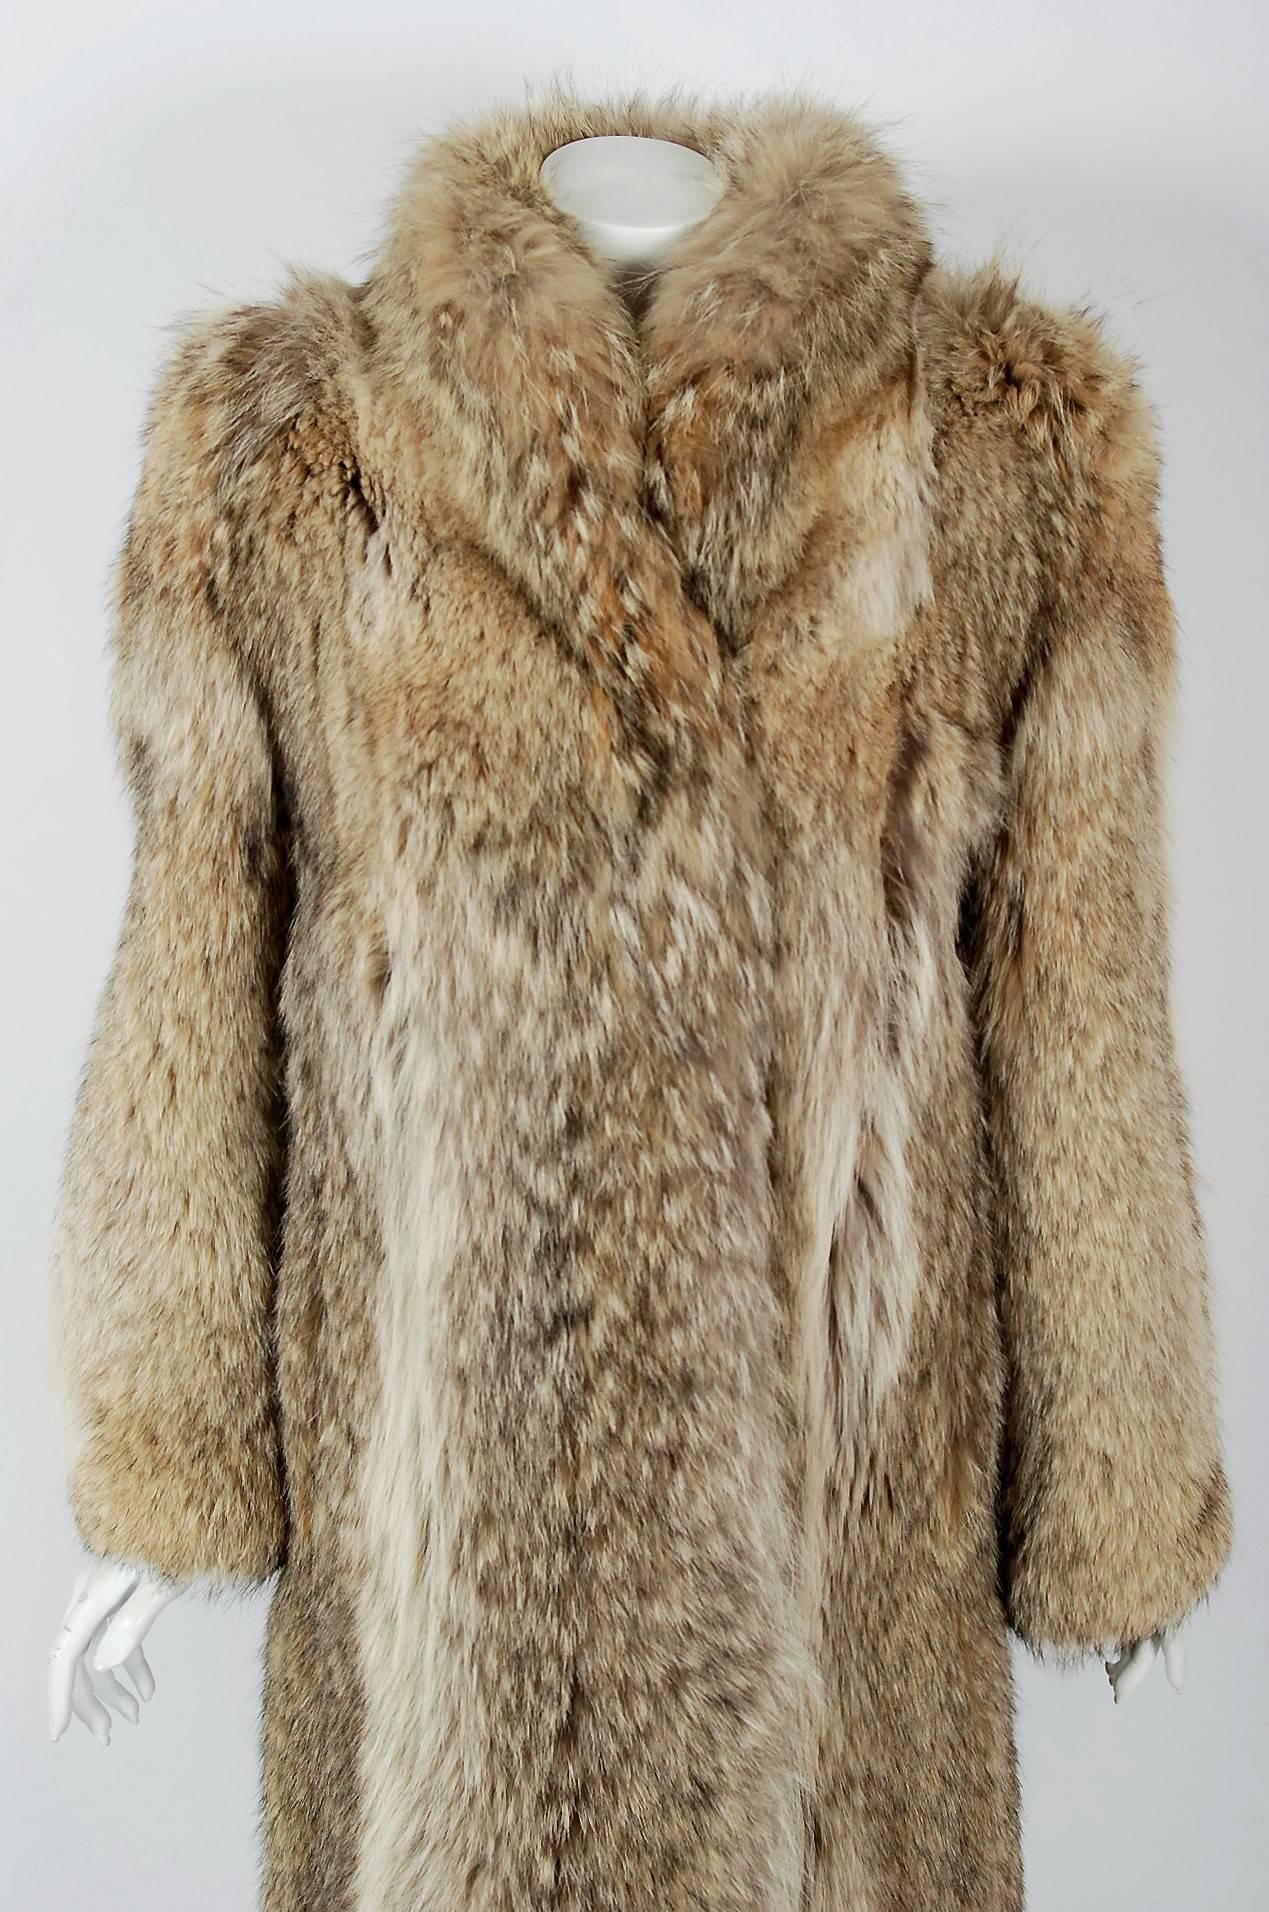 The House of Dior has been an enduring icon of Haute Couture. When the talented Marc Bohan took over as head designer in 1960, he continued the Dior tradition of elegant design. This luxurious Christian Dior Fourrure Canadian Lynx fur coat will make